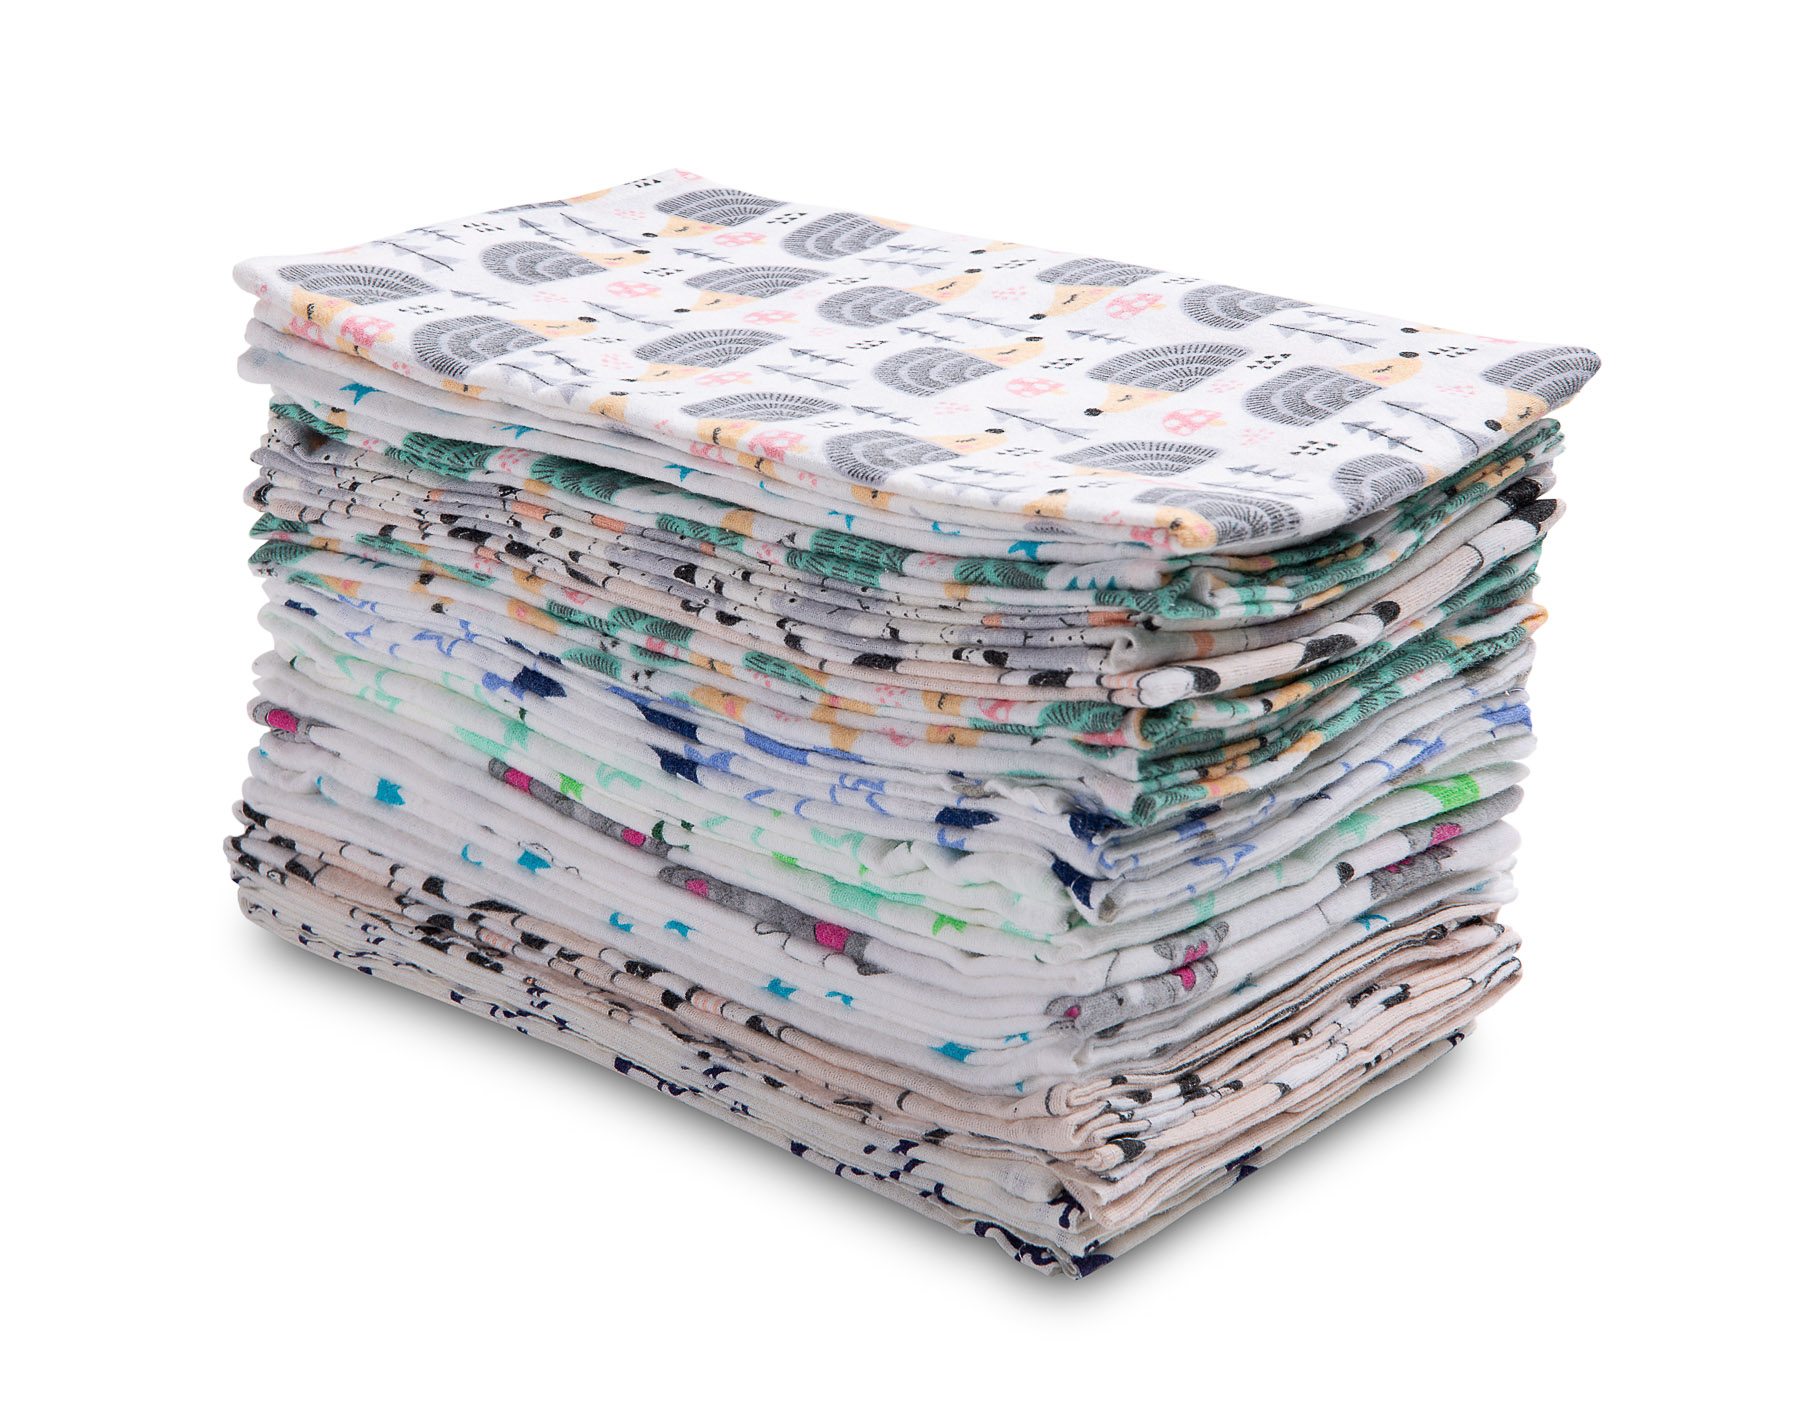 Flannel diapers – overprinted